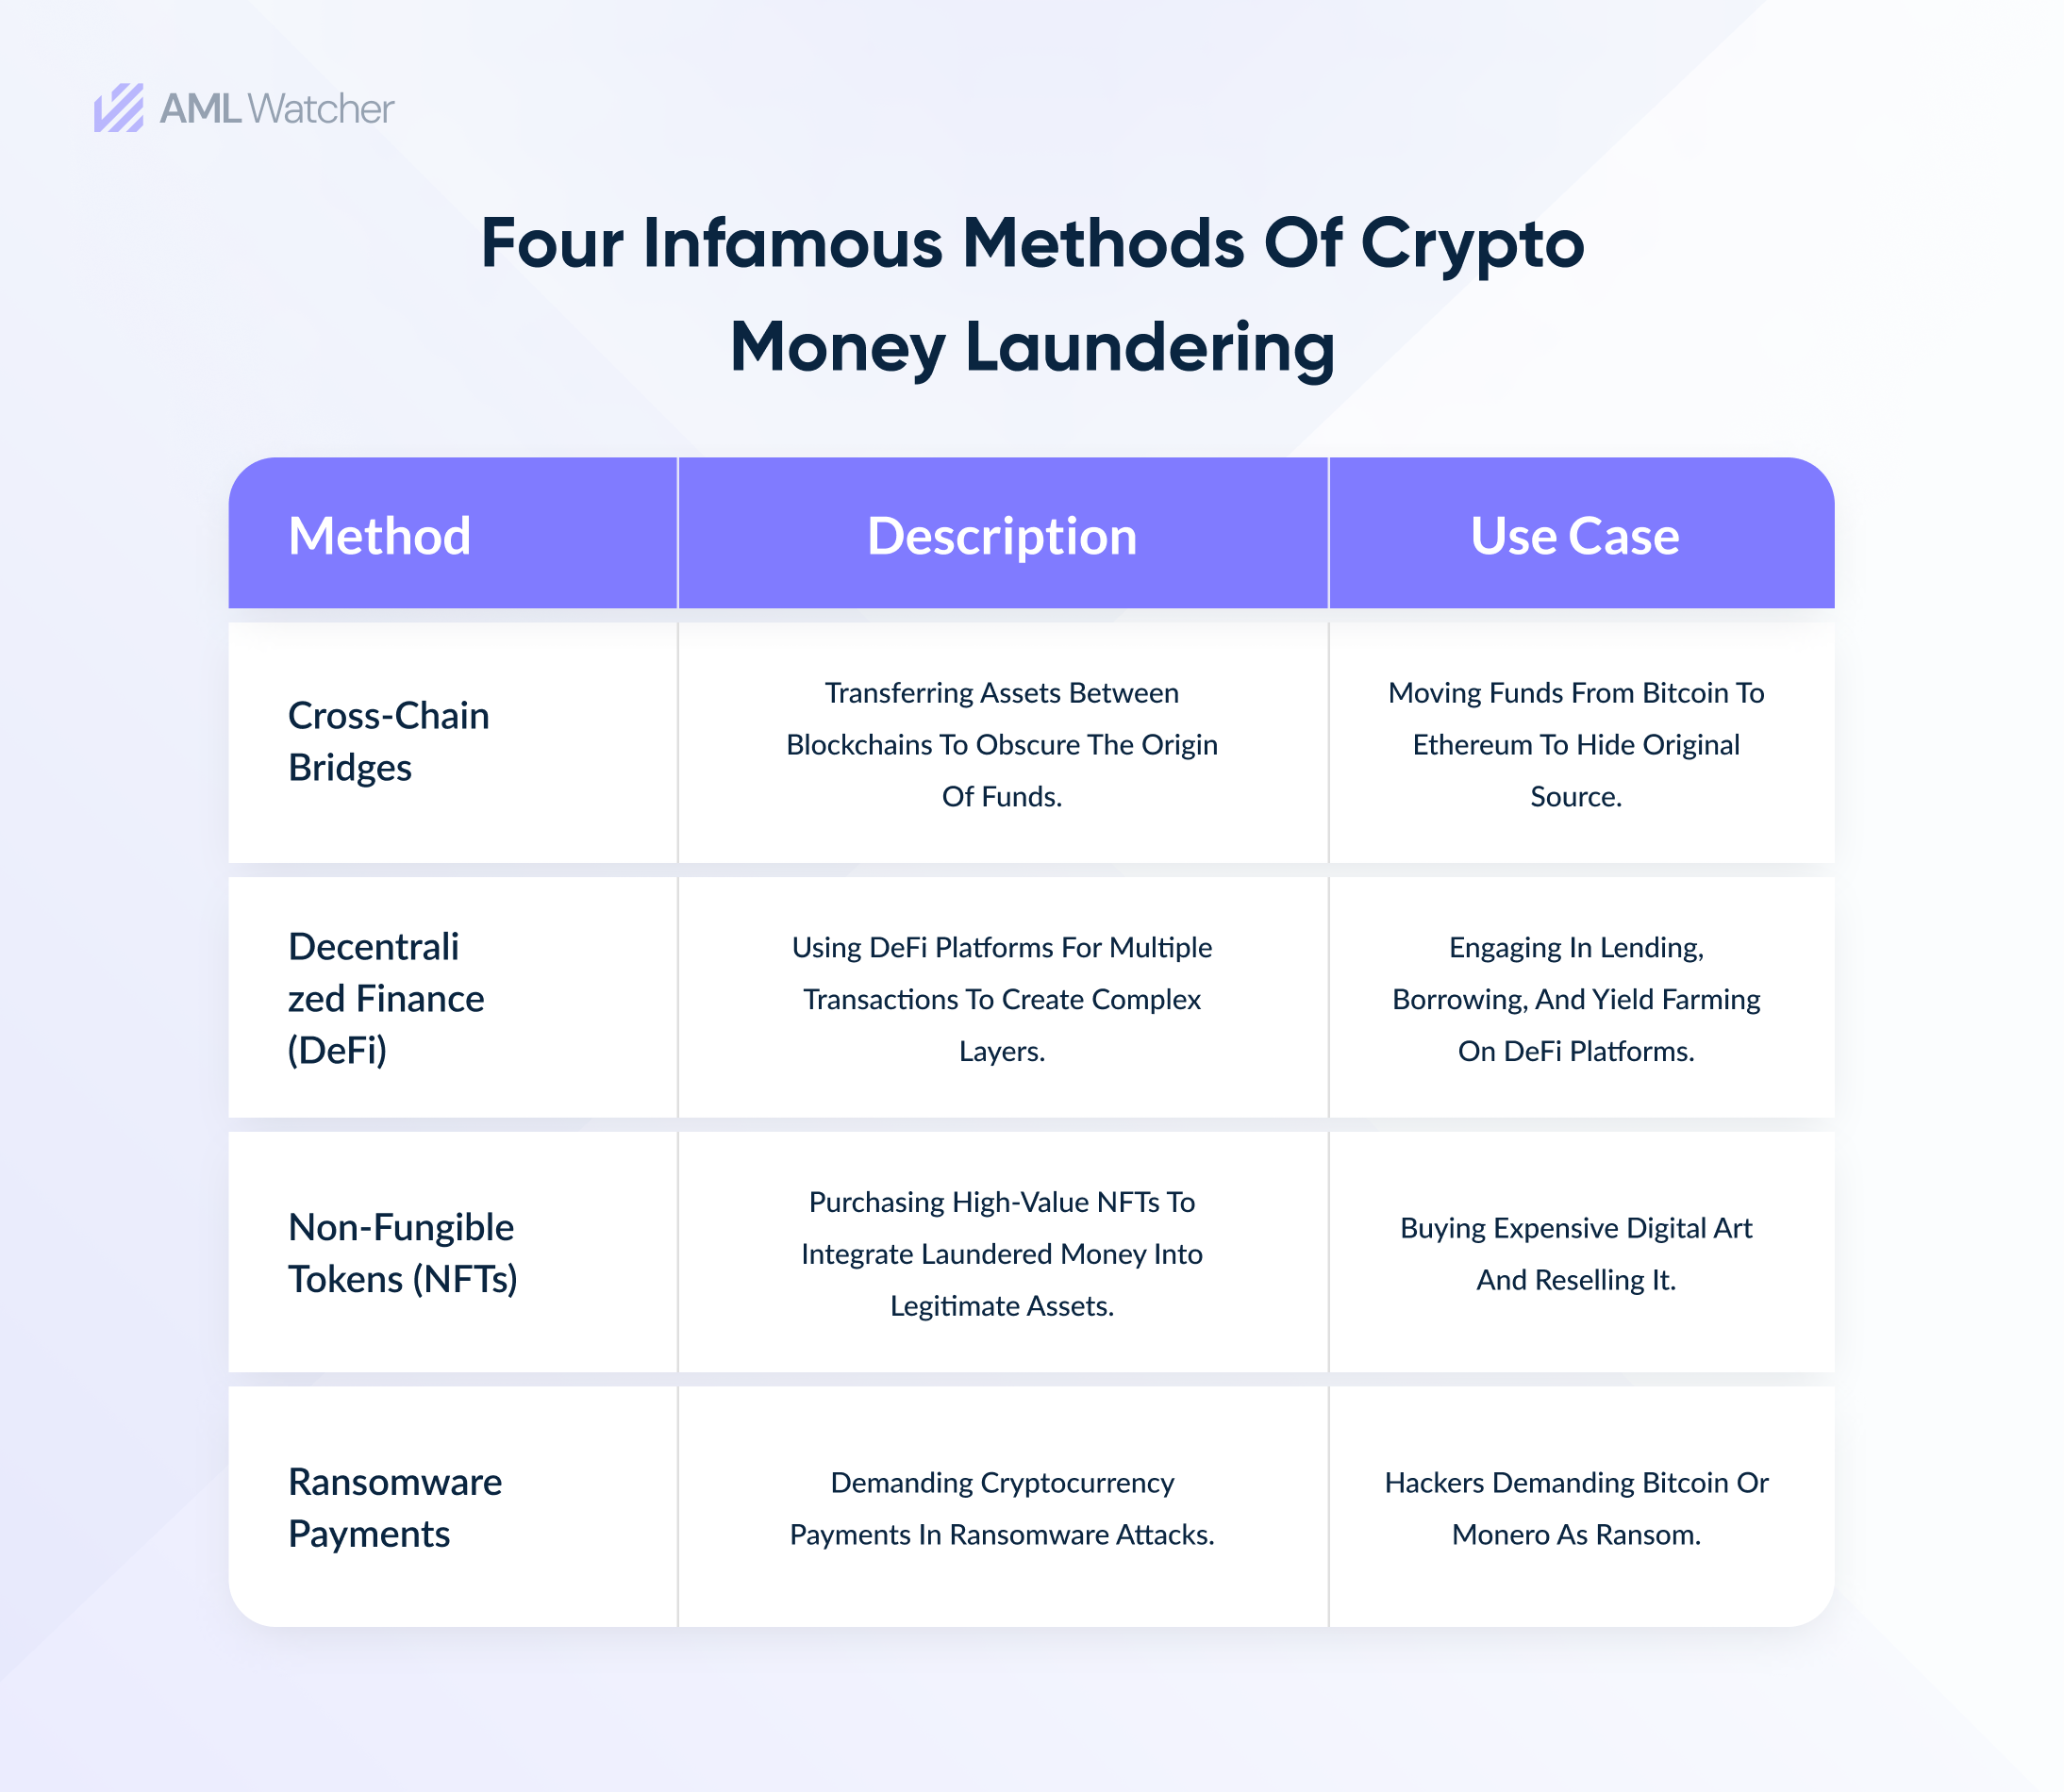 The featured image shows four methods of money laundering in crypto with real-world examples.